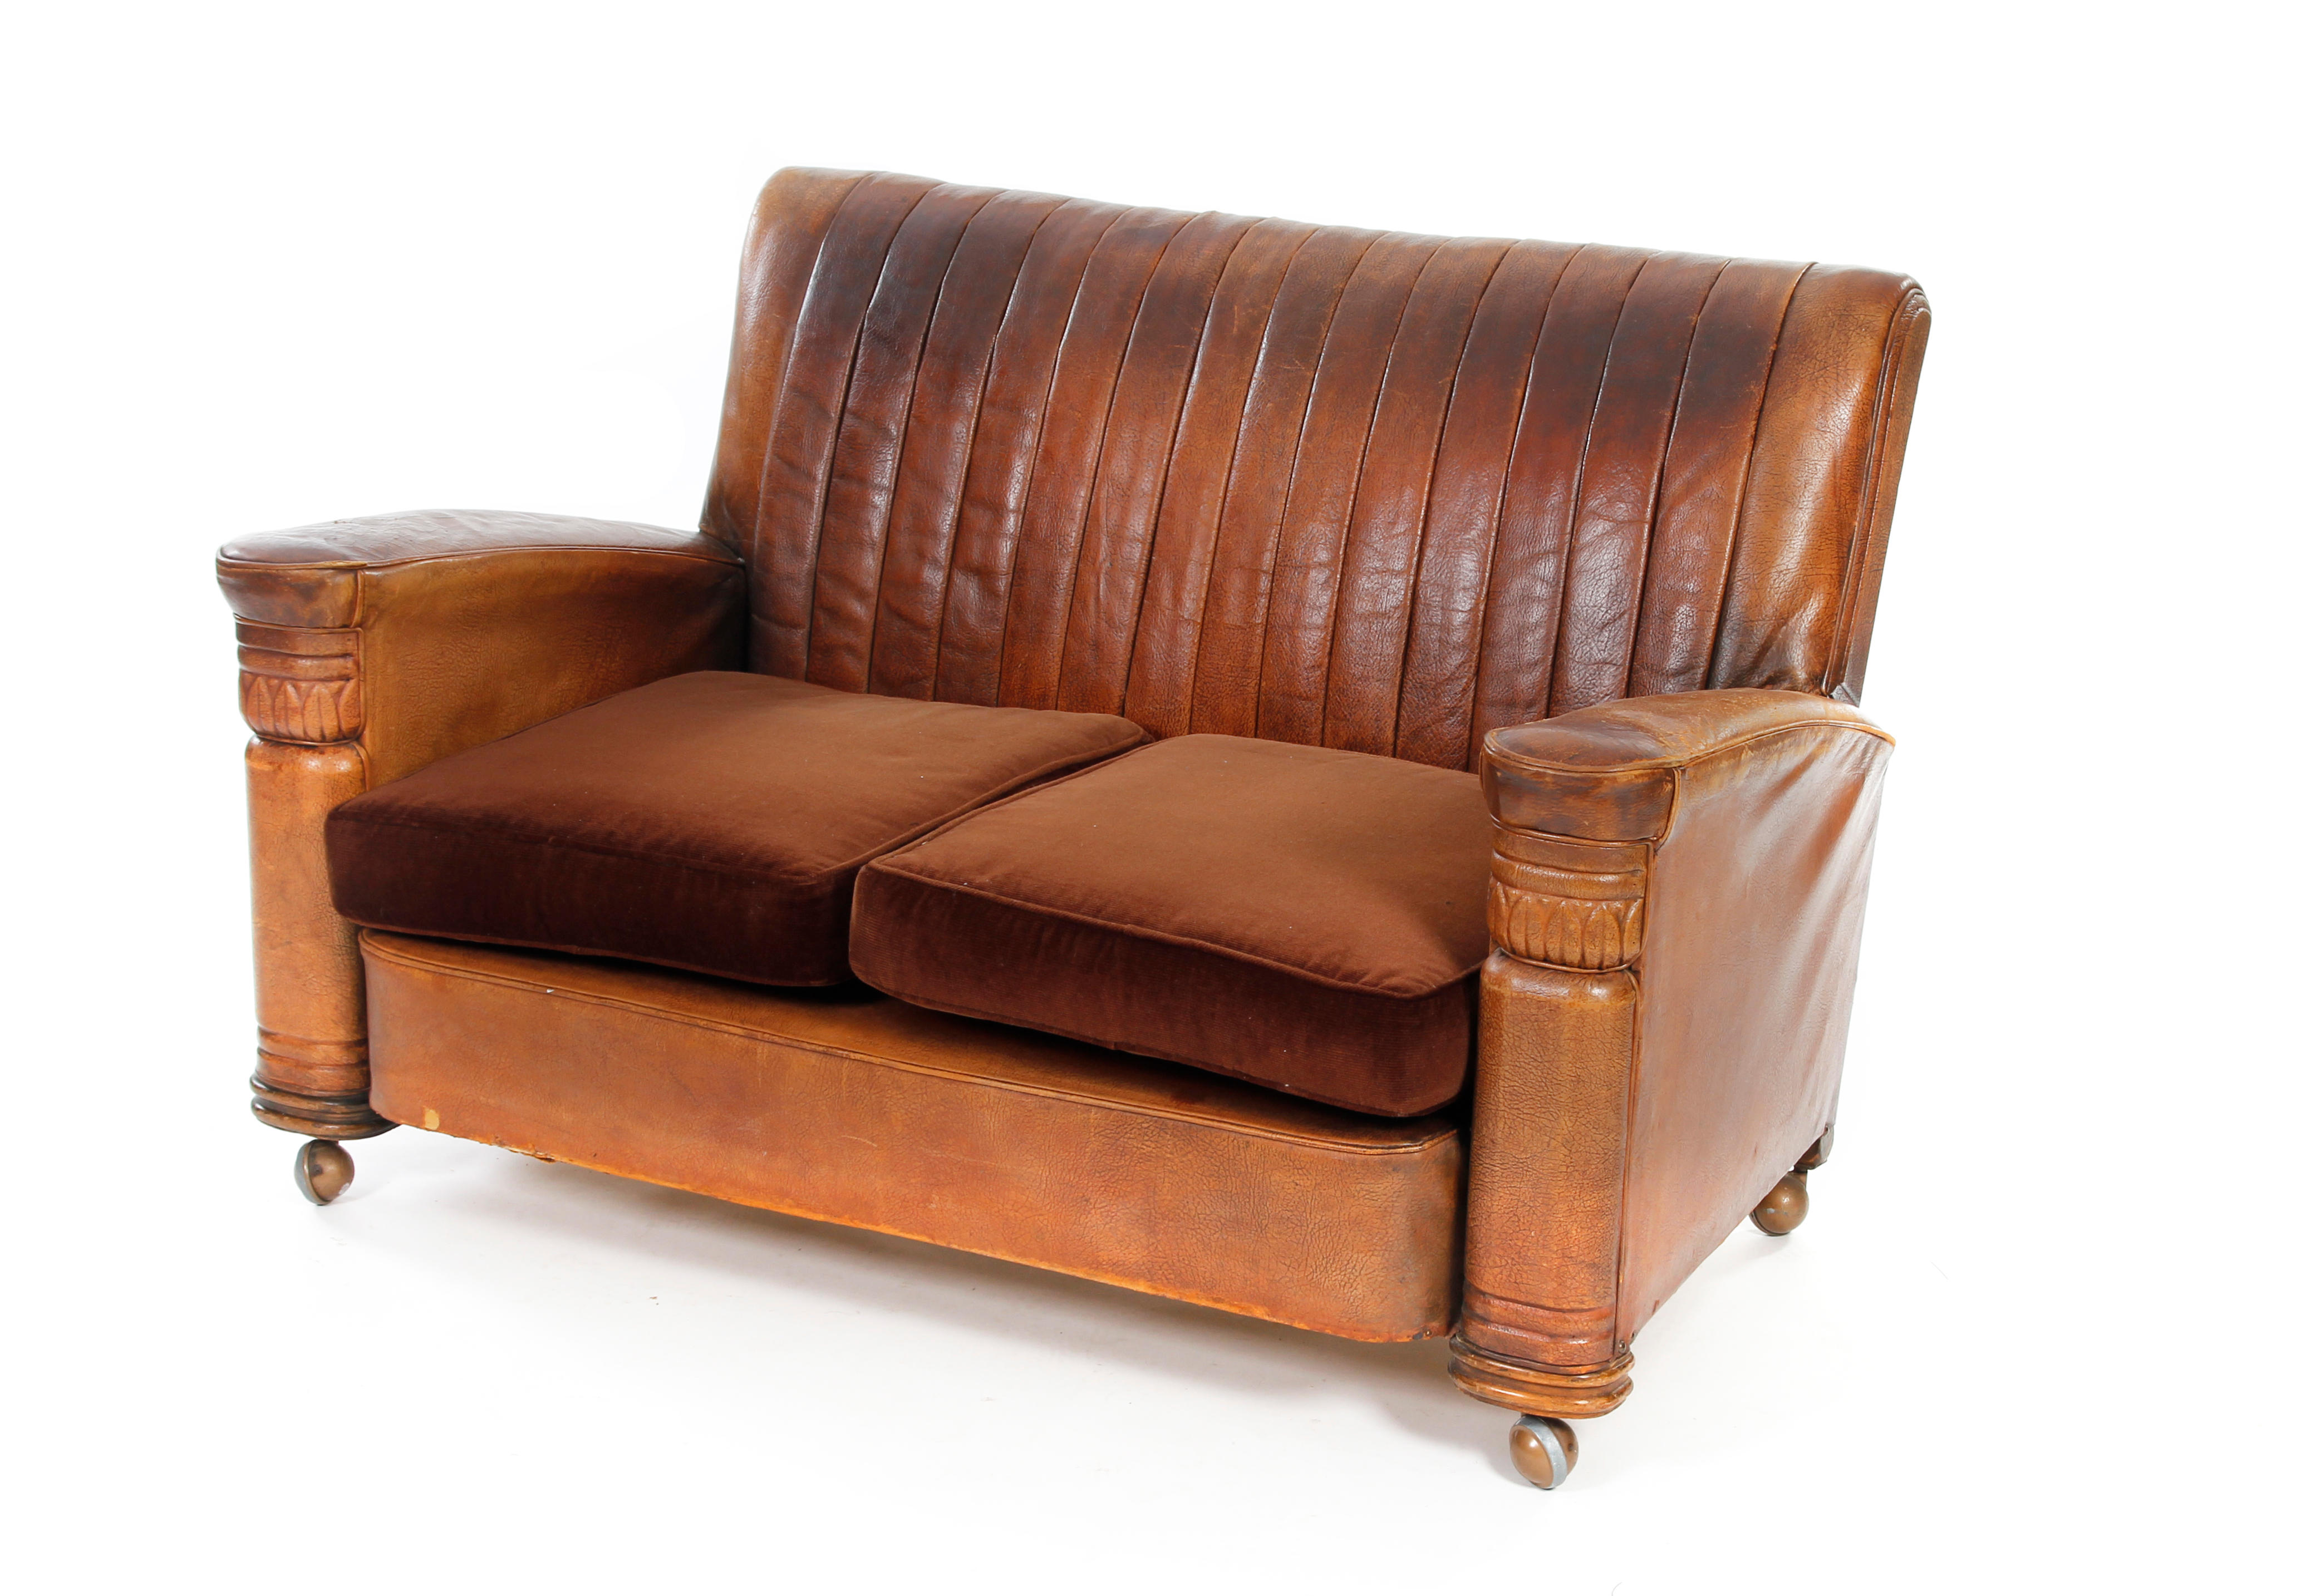 A 1930s Art Deco tan leather-upholstered two-seater settee